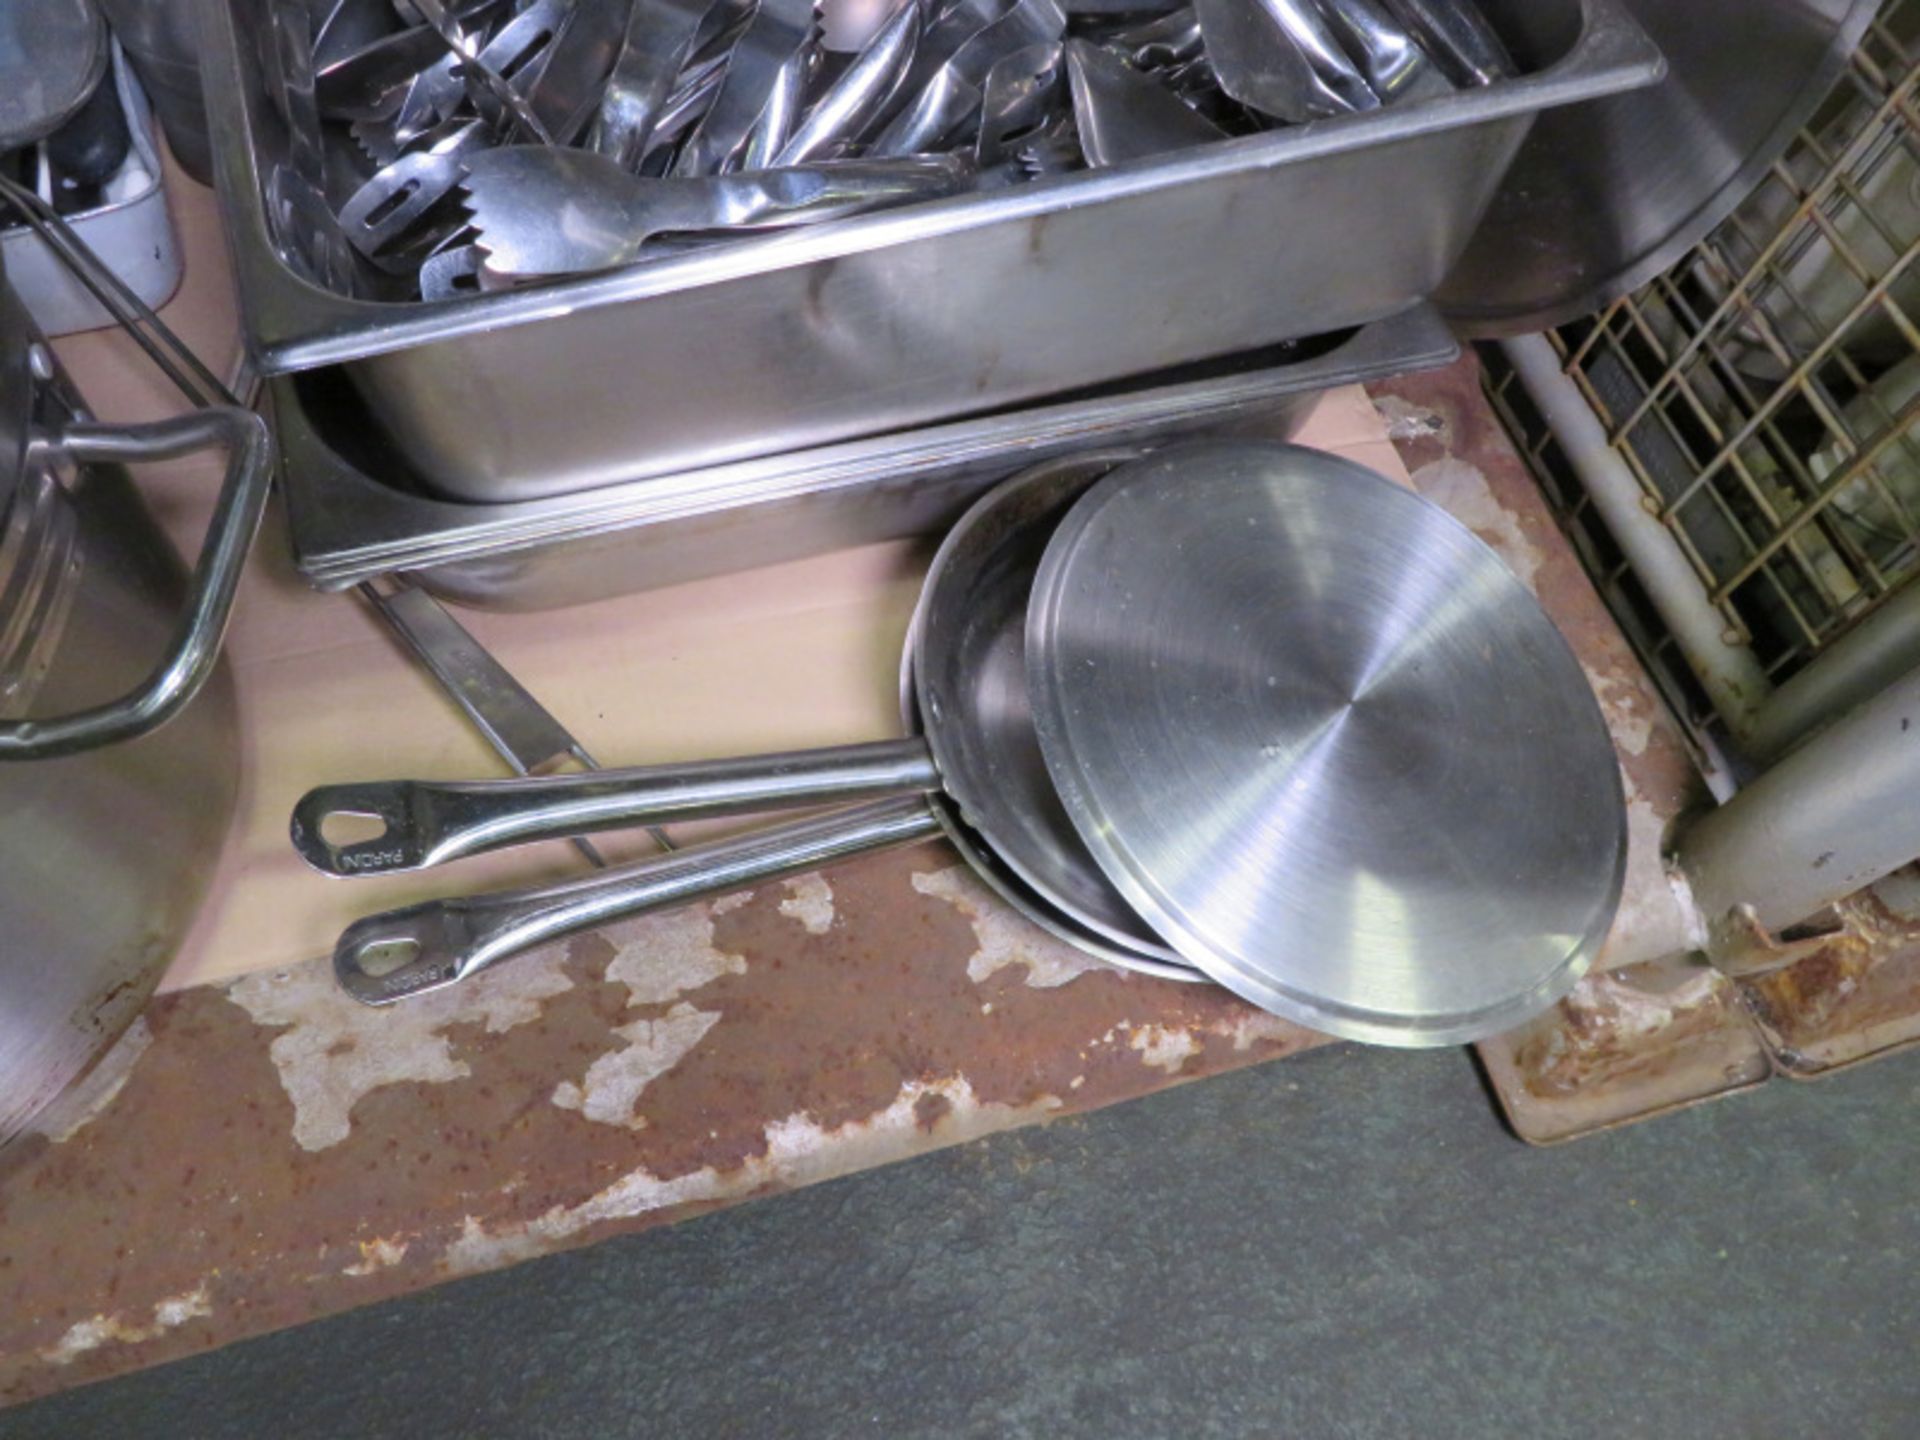 Stainless Steel Catering Equipment - gastronorm pans, cooking pot, shelf, pans, mixing bowls & more - Image 4 of 6